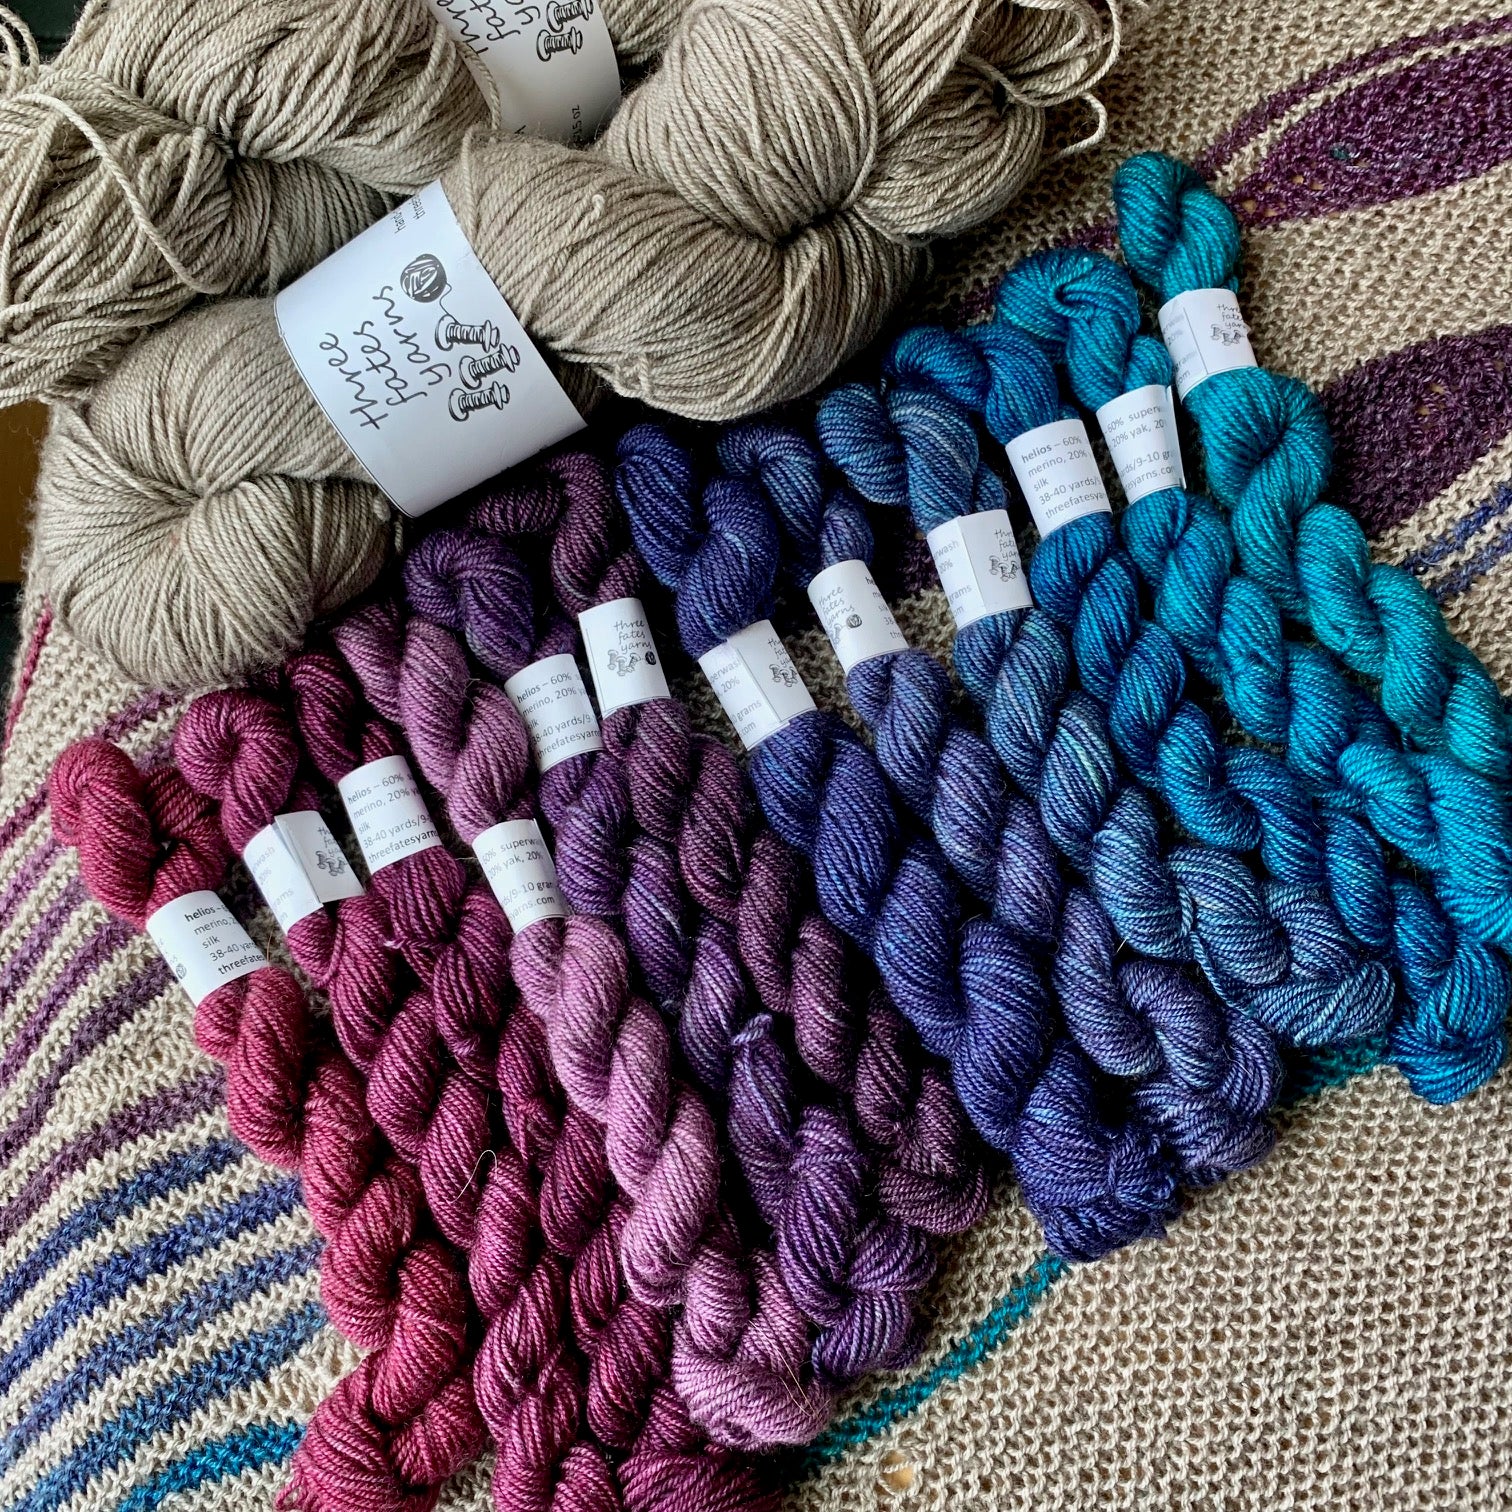 12 color helios mini skein sets (contrast skeins not included)